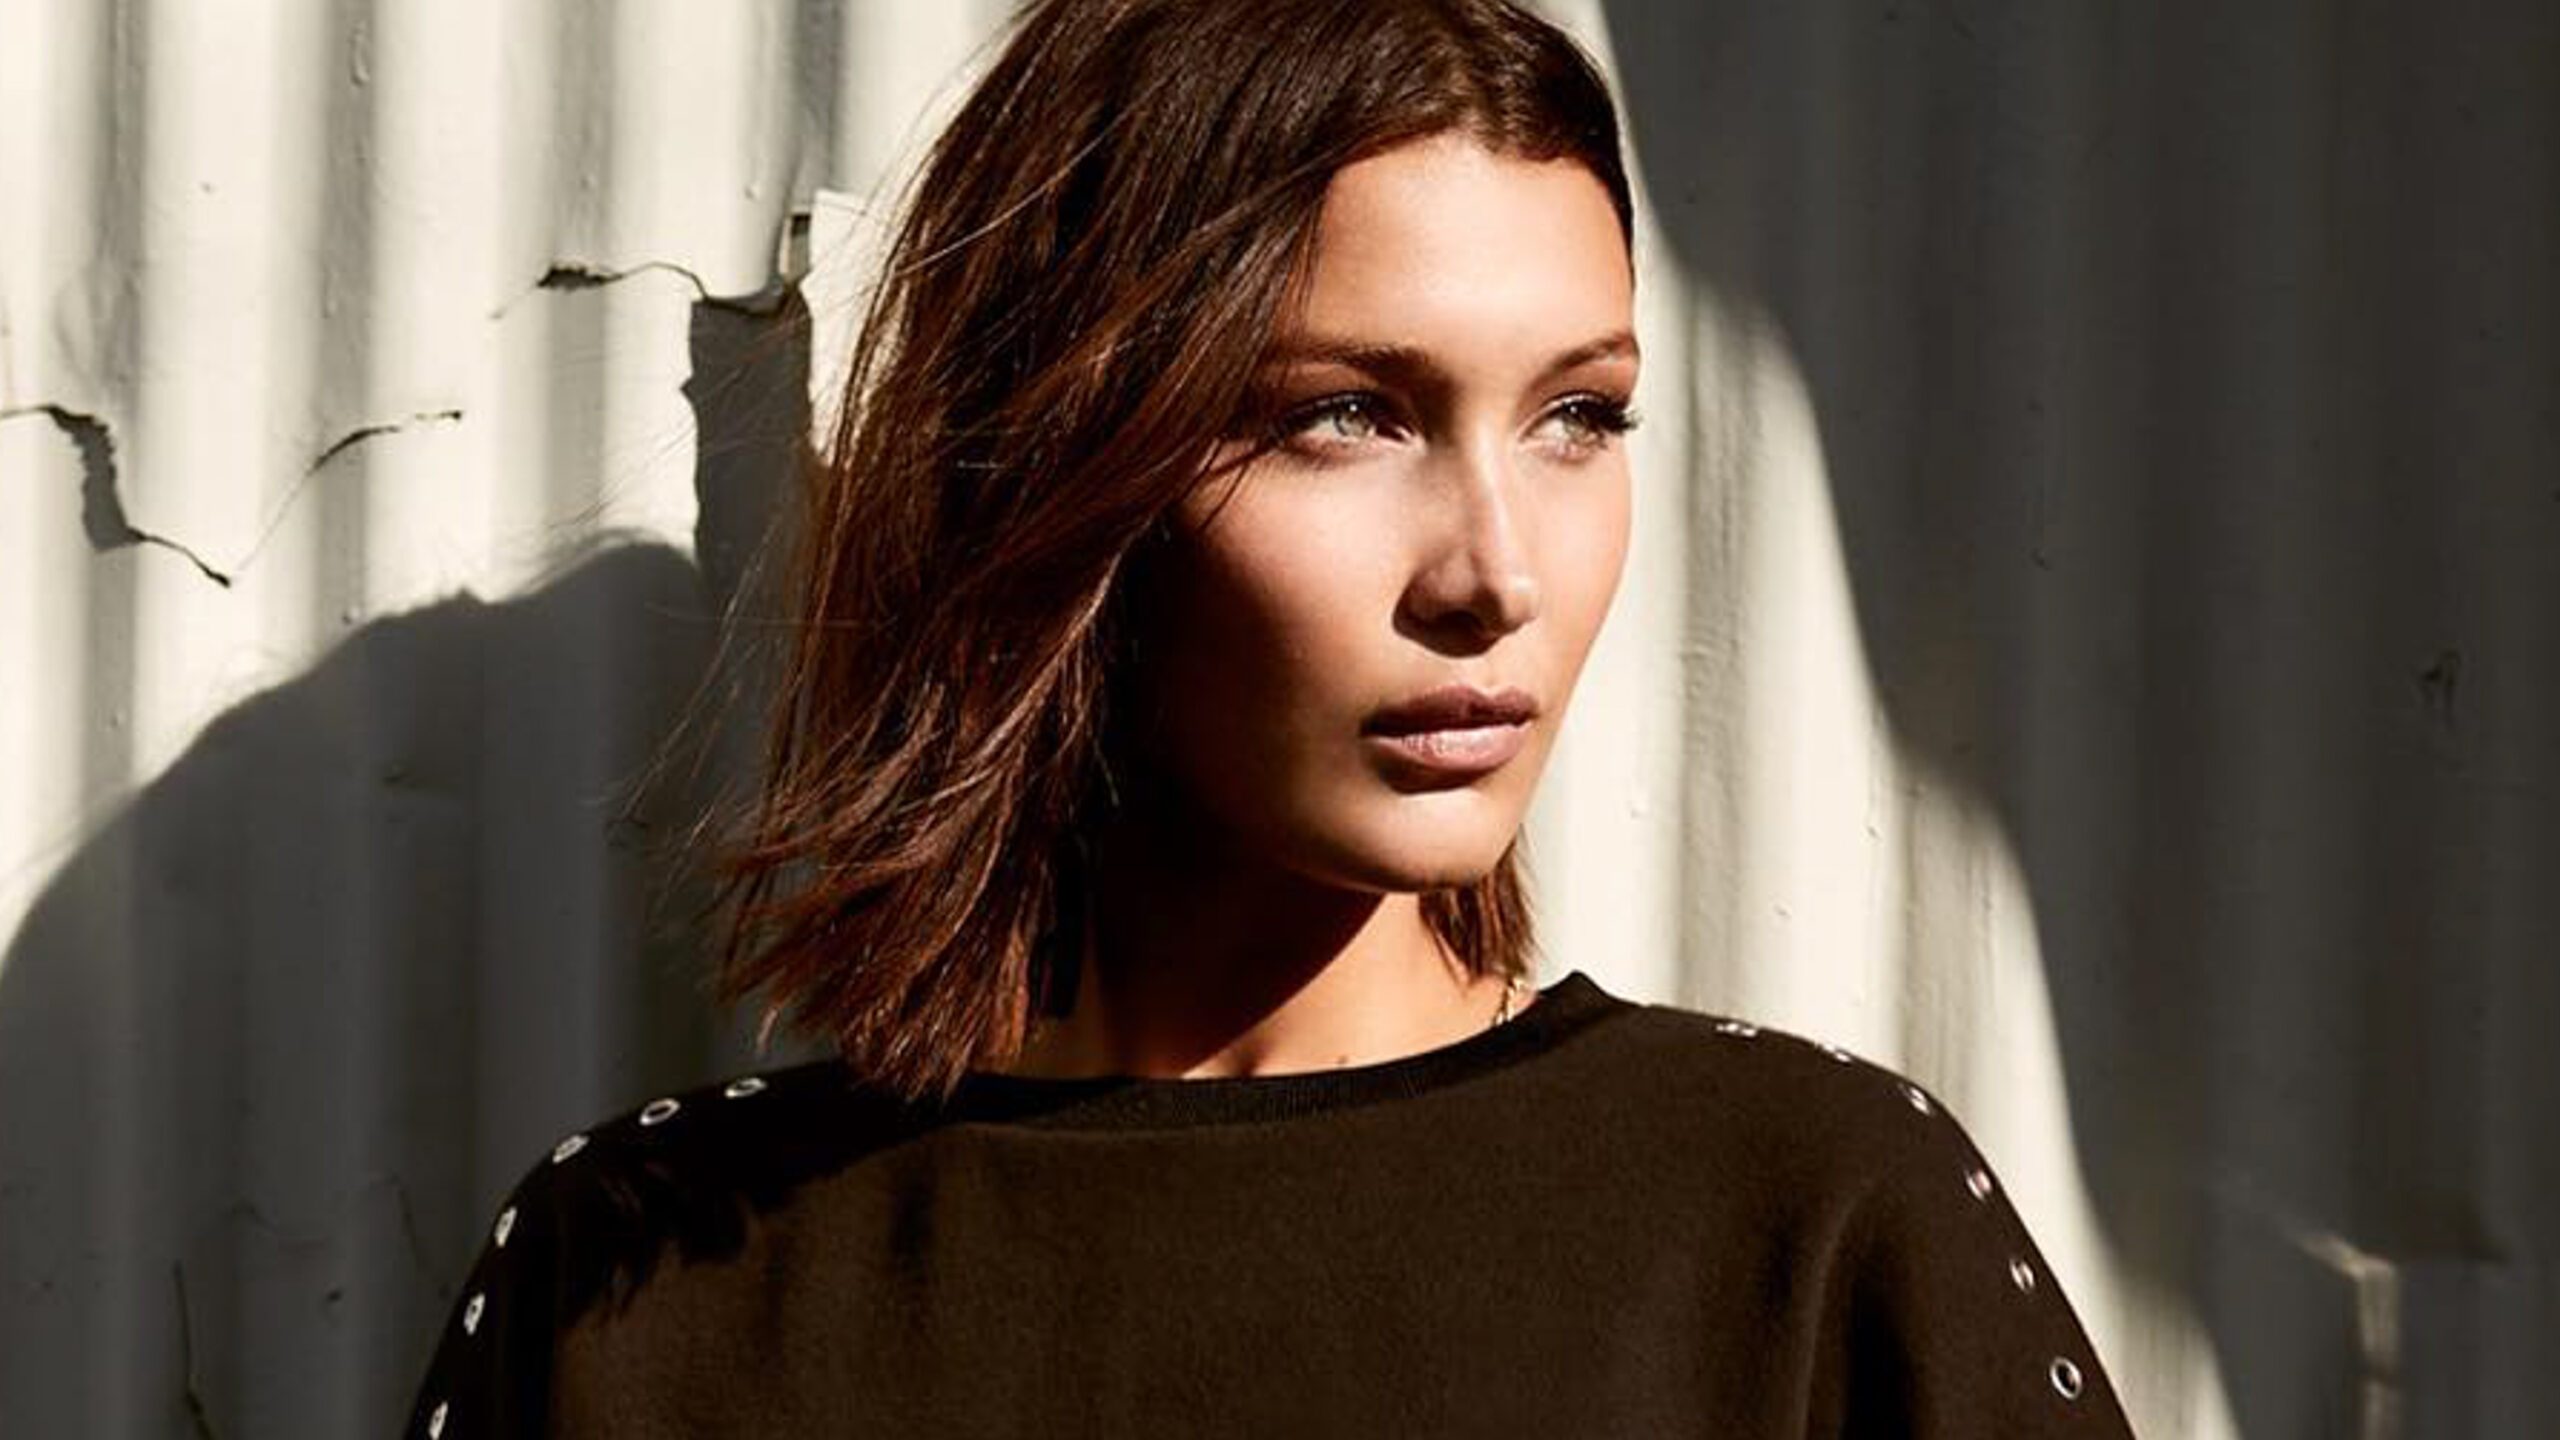 LOOK: Bella Hadid is the face of Penshoppe’s pre-holiday campaign